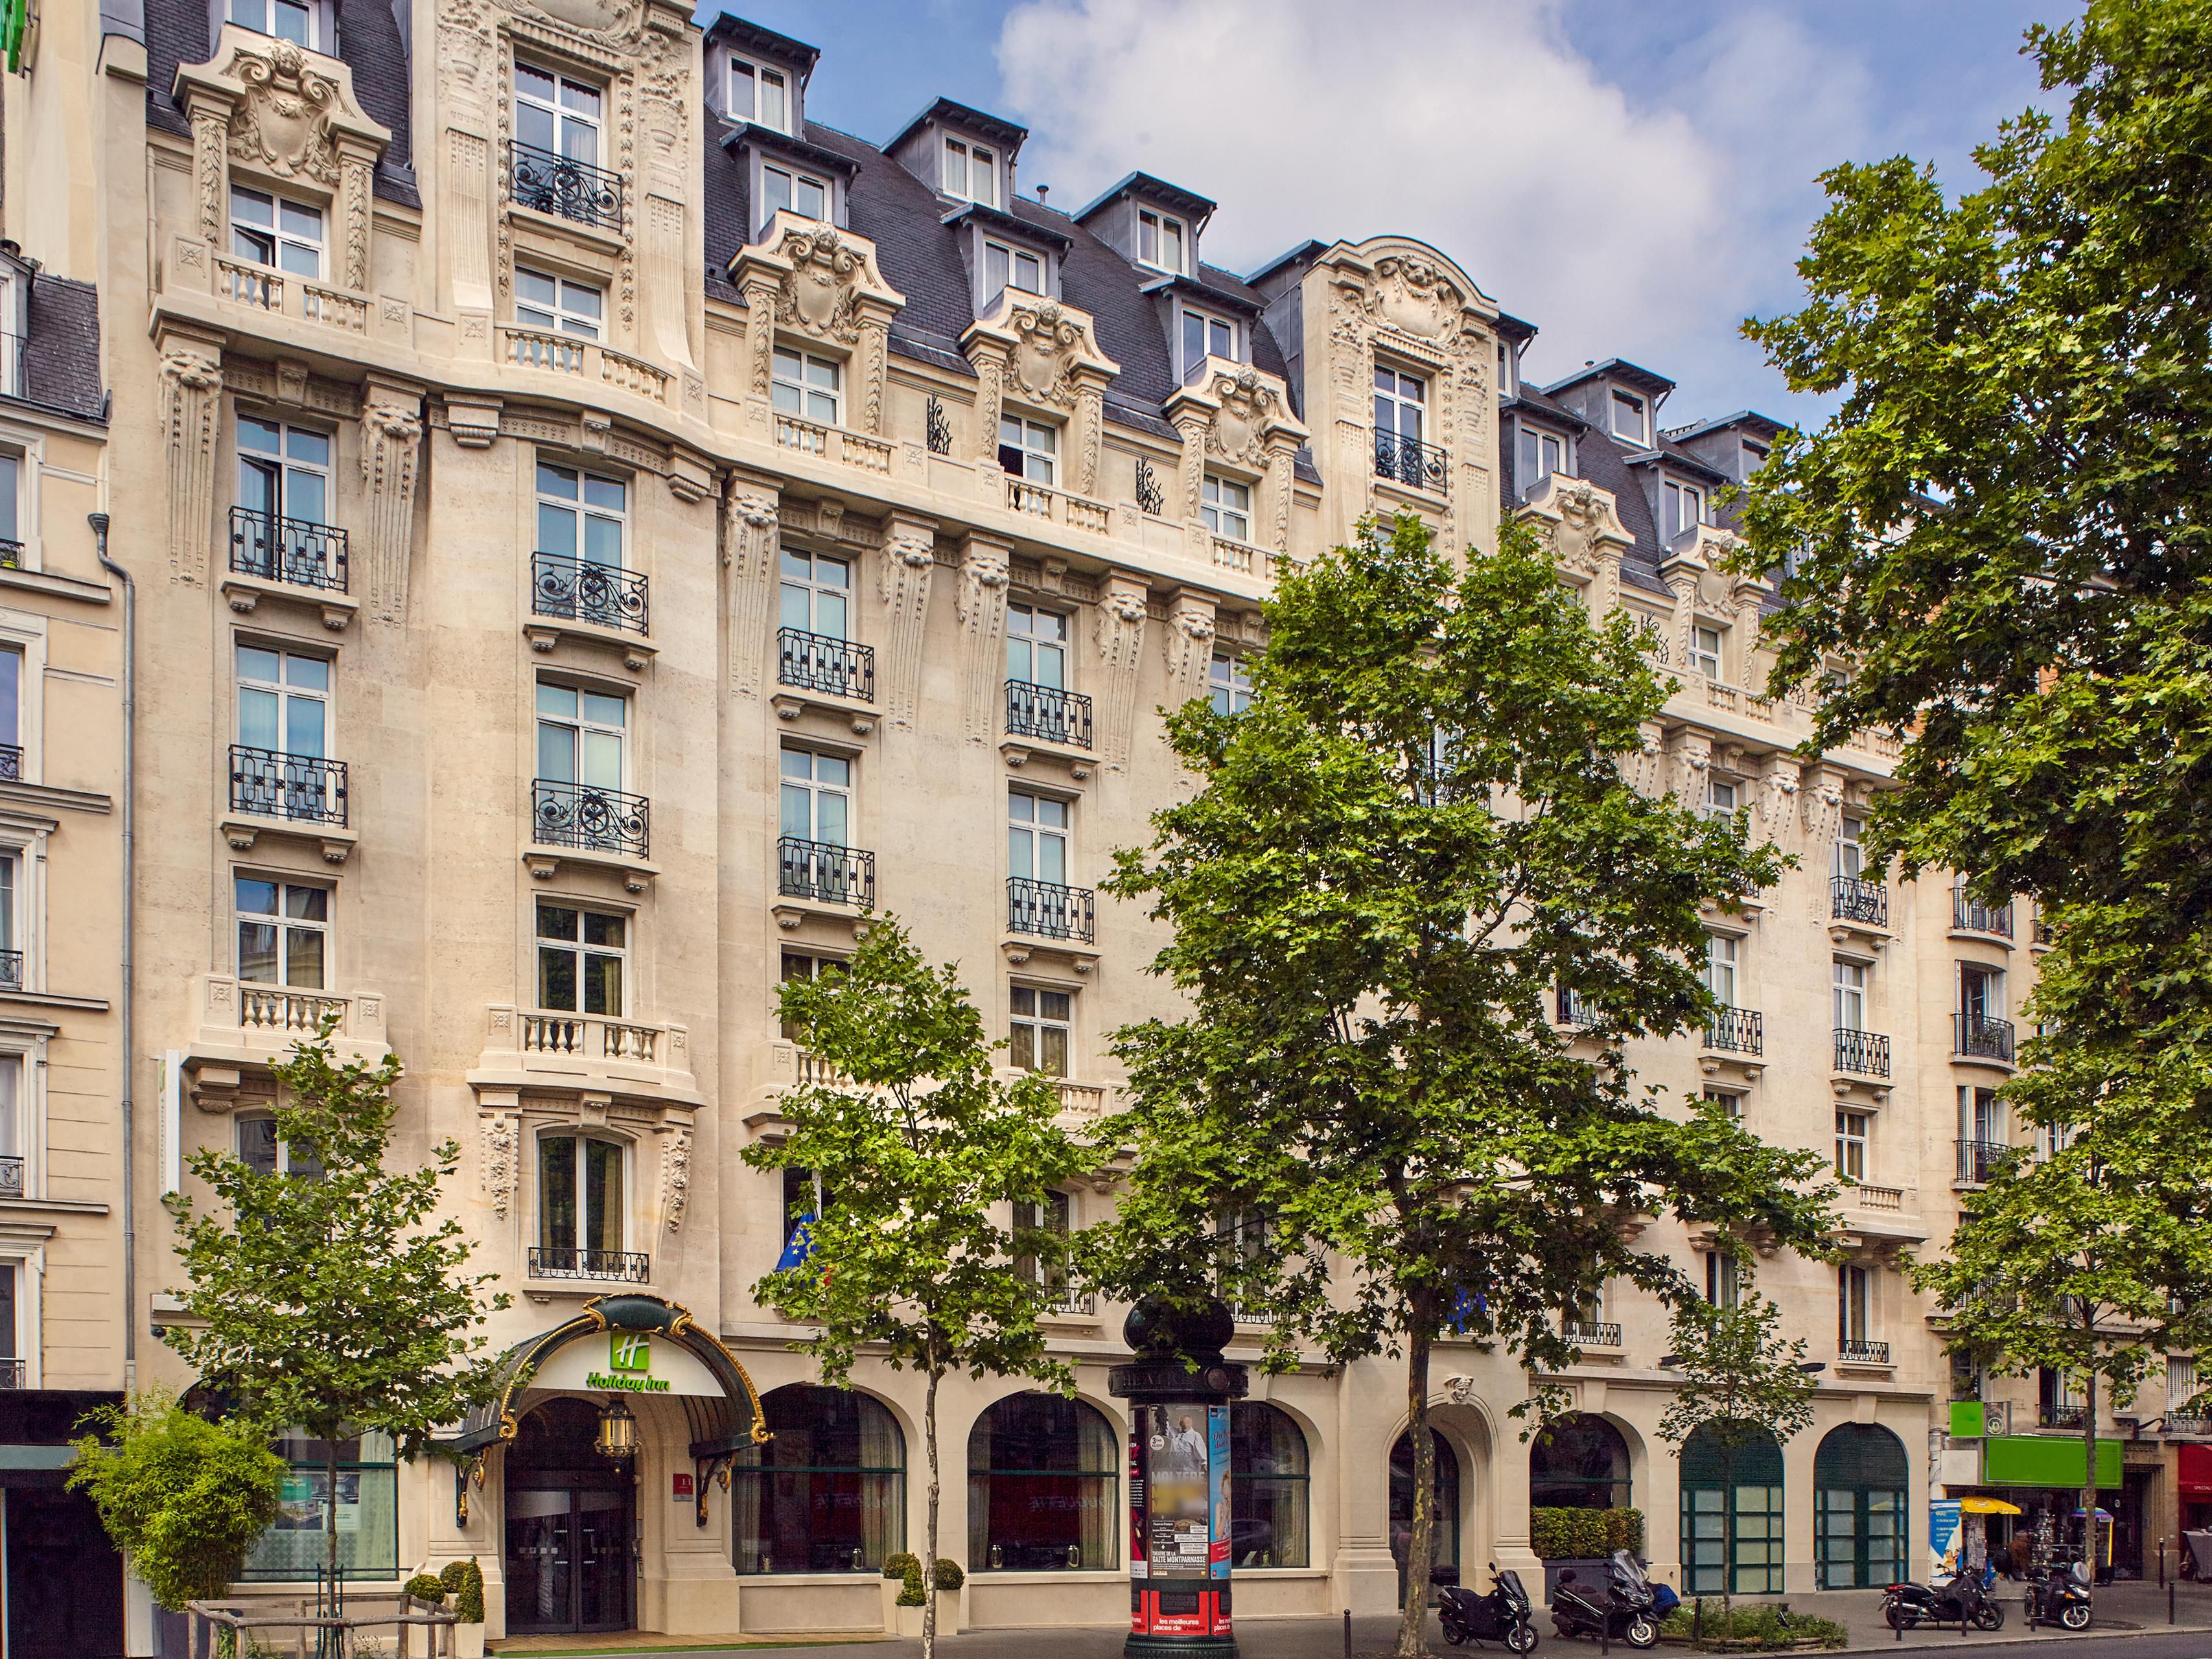 Our central Paris hotel is two blocks from the busy Gare de Lyon train station and walking distance to important Paris sites, like the magnificent Opera Bastille and Accor Arena. Take a 15-minute train ride to La Défense business district. Just 35 minutes by train, take your kids to Disneyland, for an unforgettable adventure.​